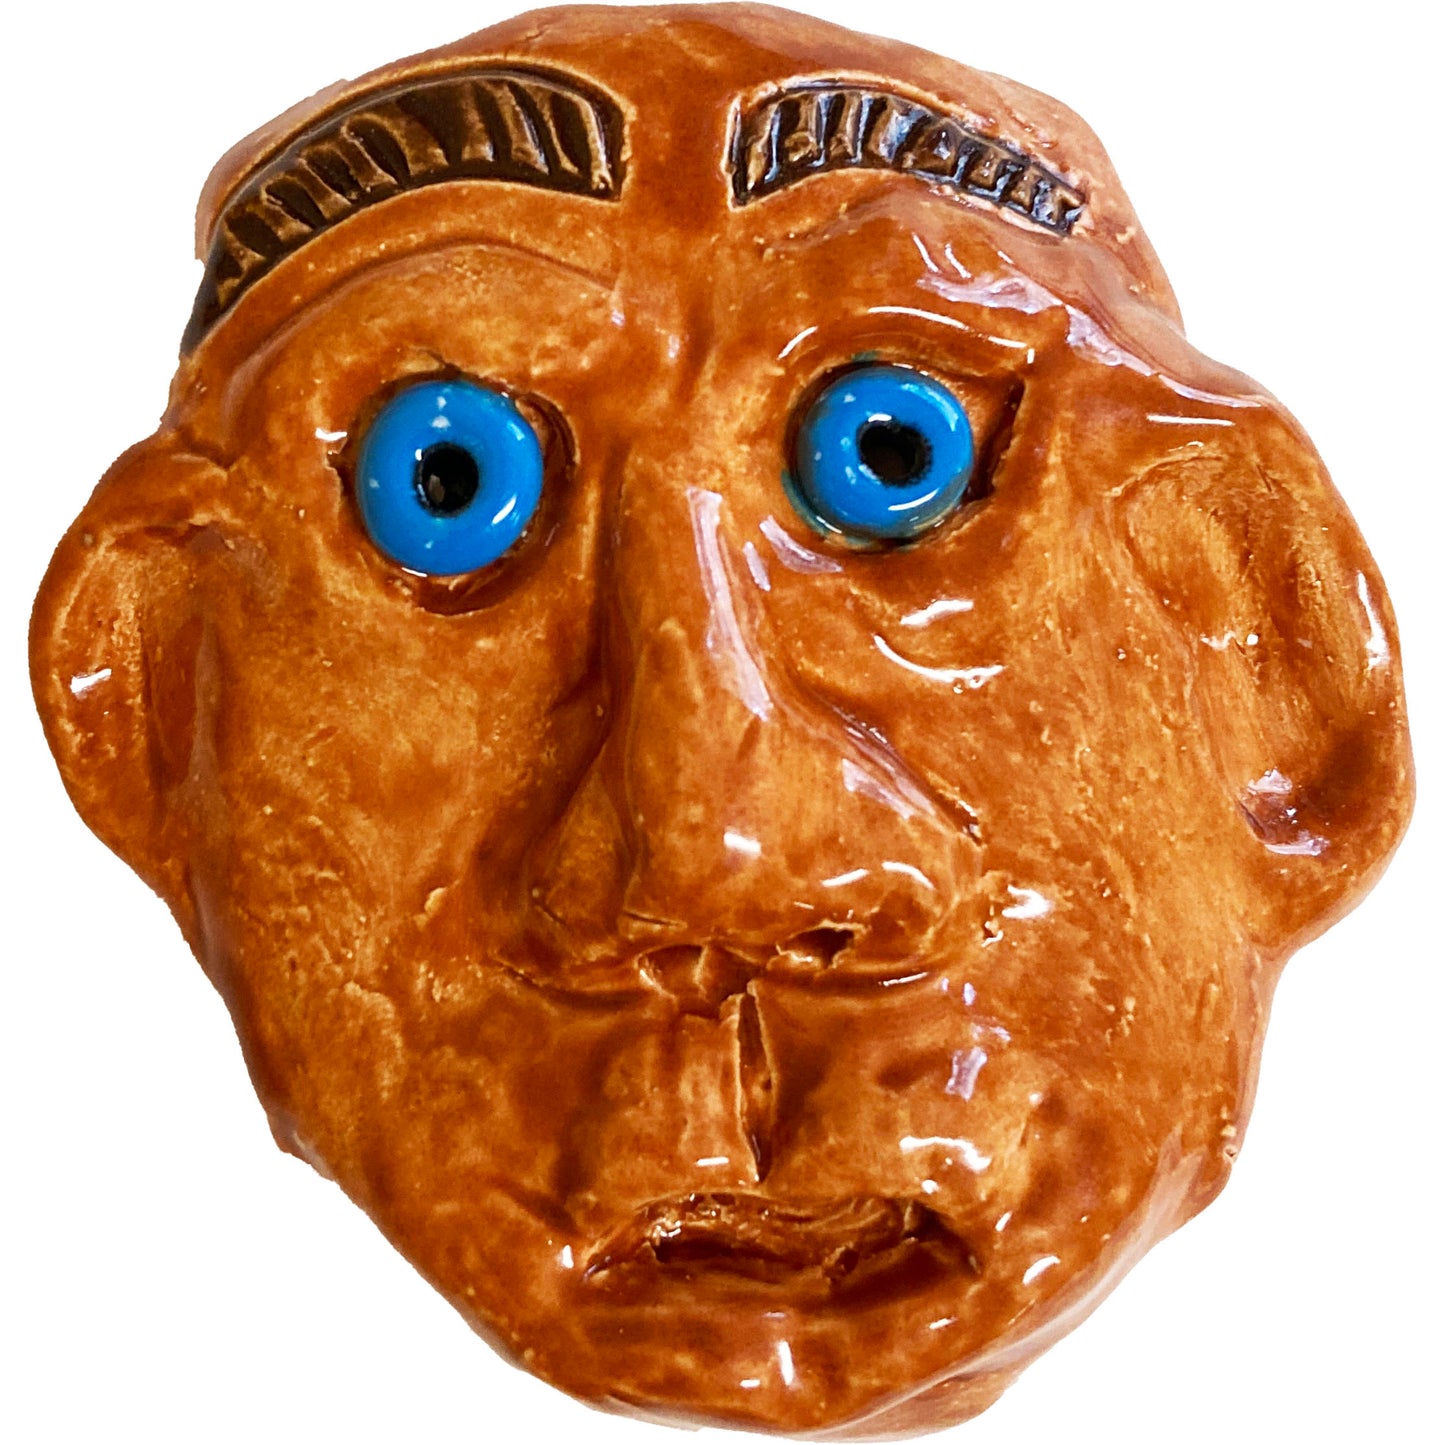 WATCH Resources Art Guild - Ceramic Arts Handmade Clay Crafts 5-inch x 5-inch Glazed Face by Lisa Uptain